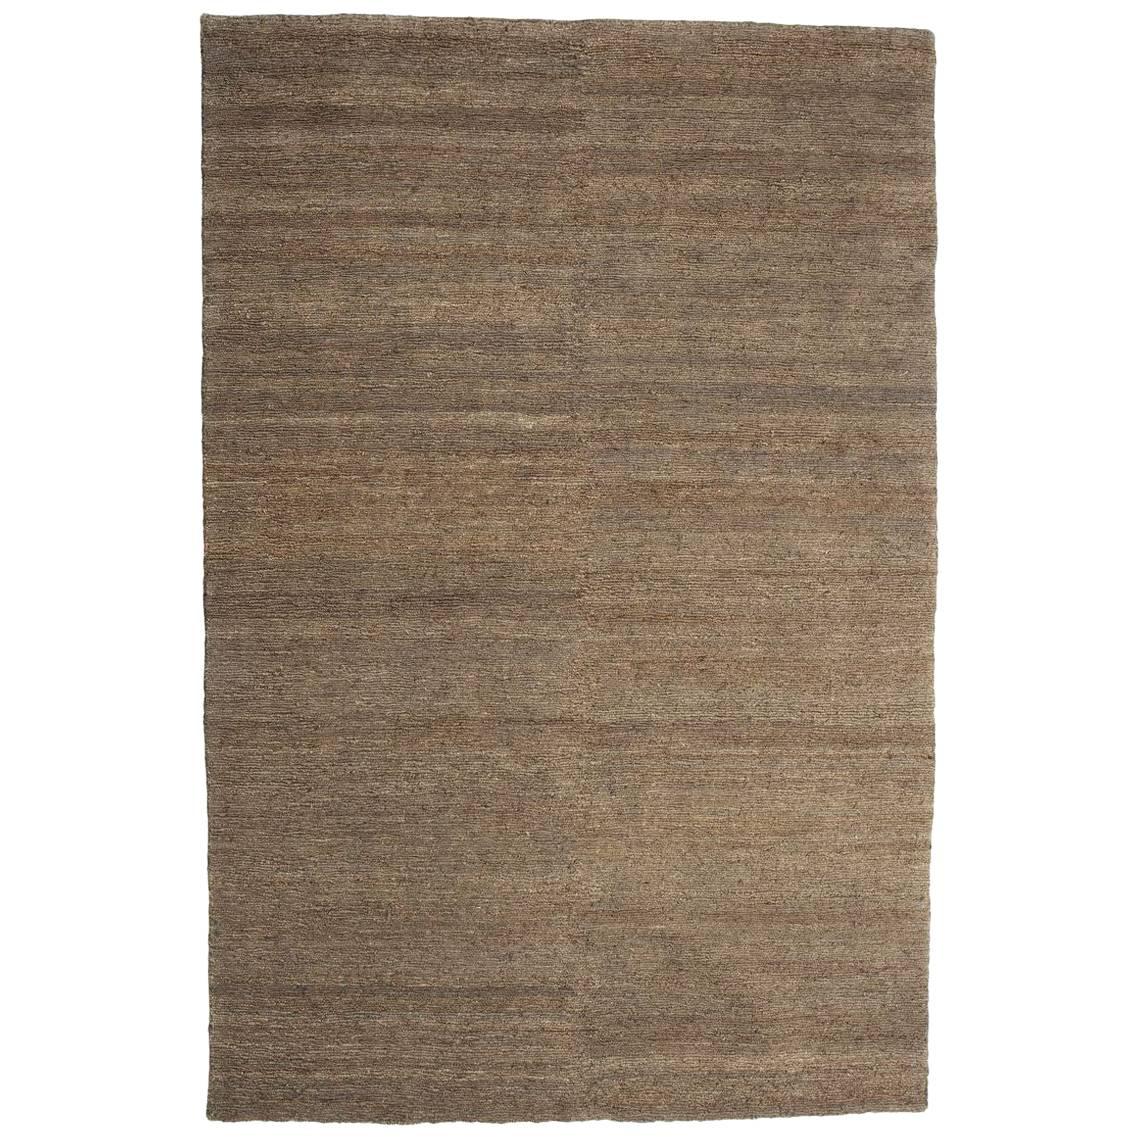 Khaki Earth Rug in Hand-Knotted Jute by Nani Marquina & Ariadna Miquel, Small For Sale